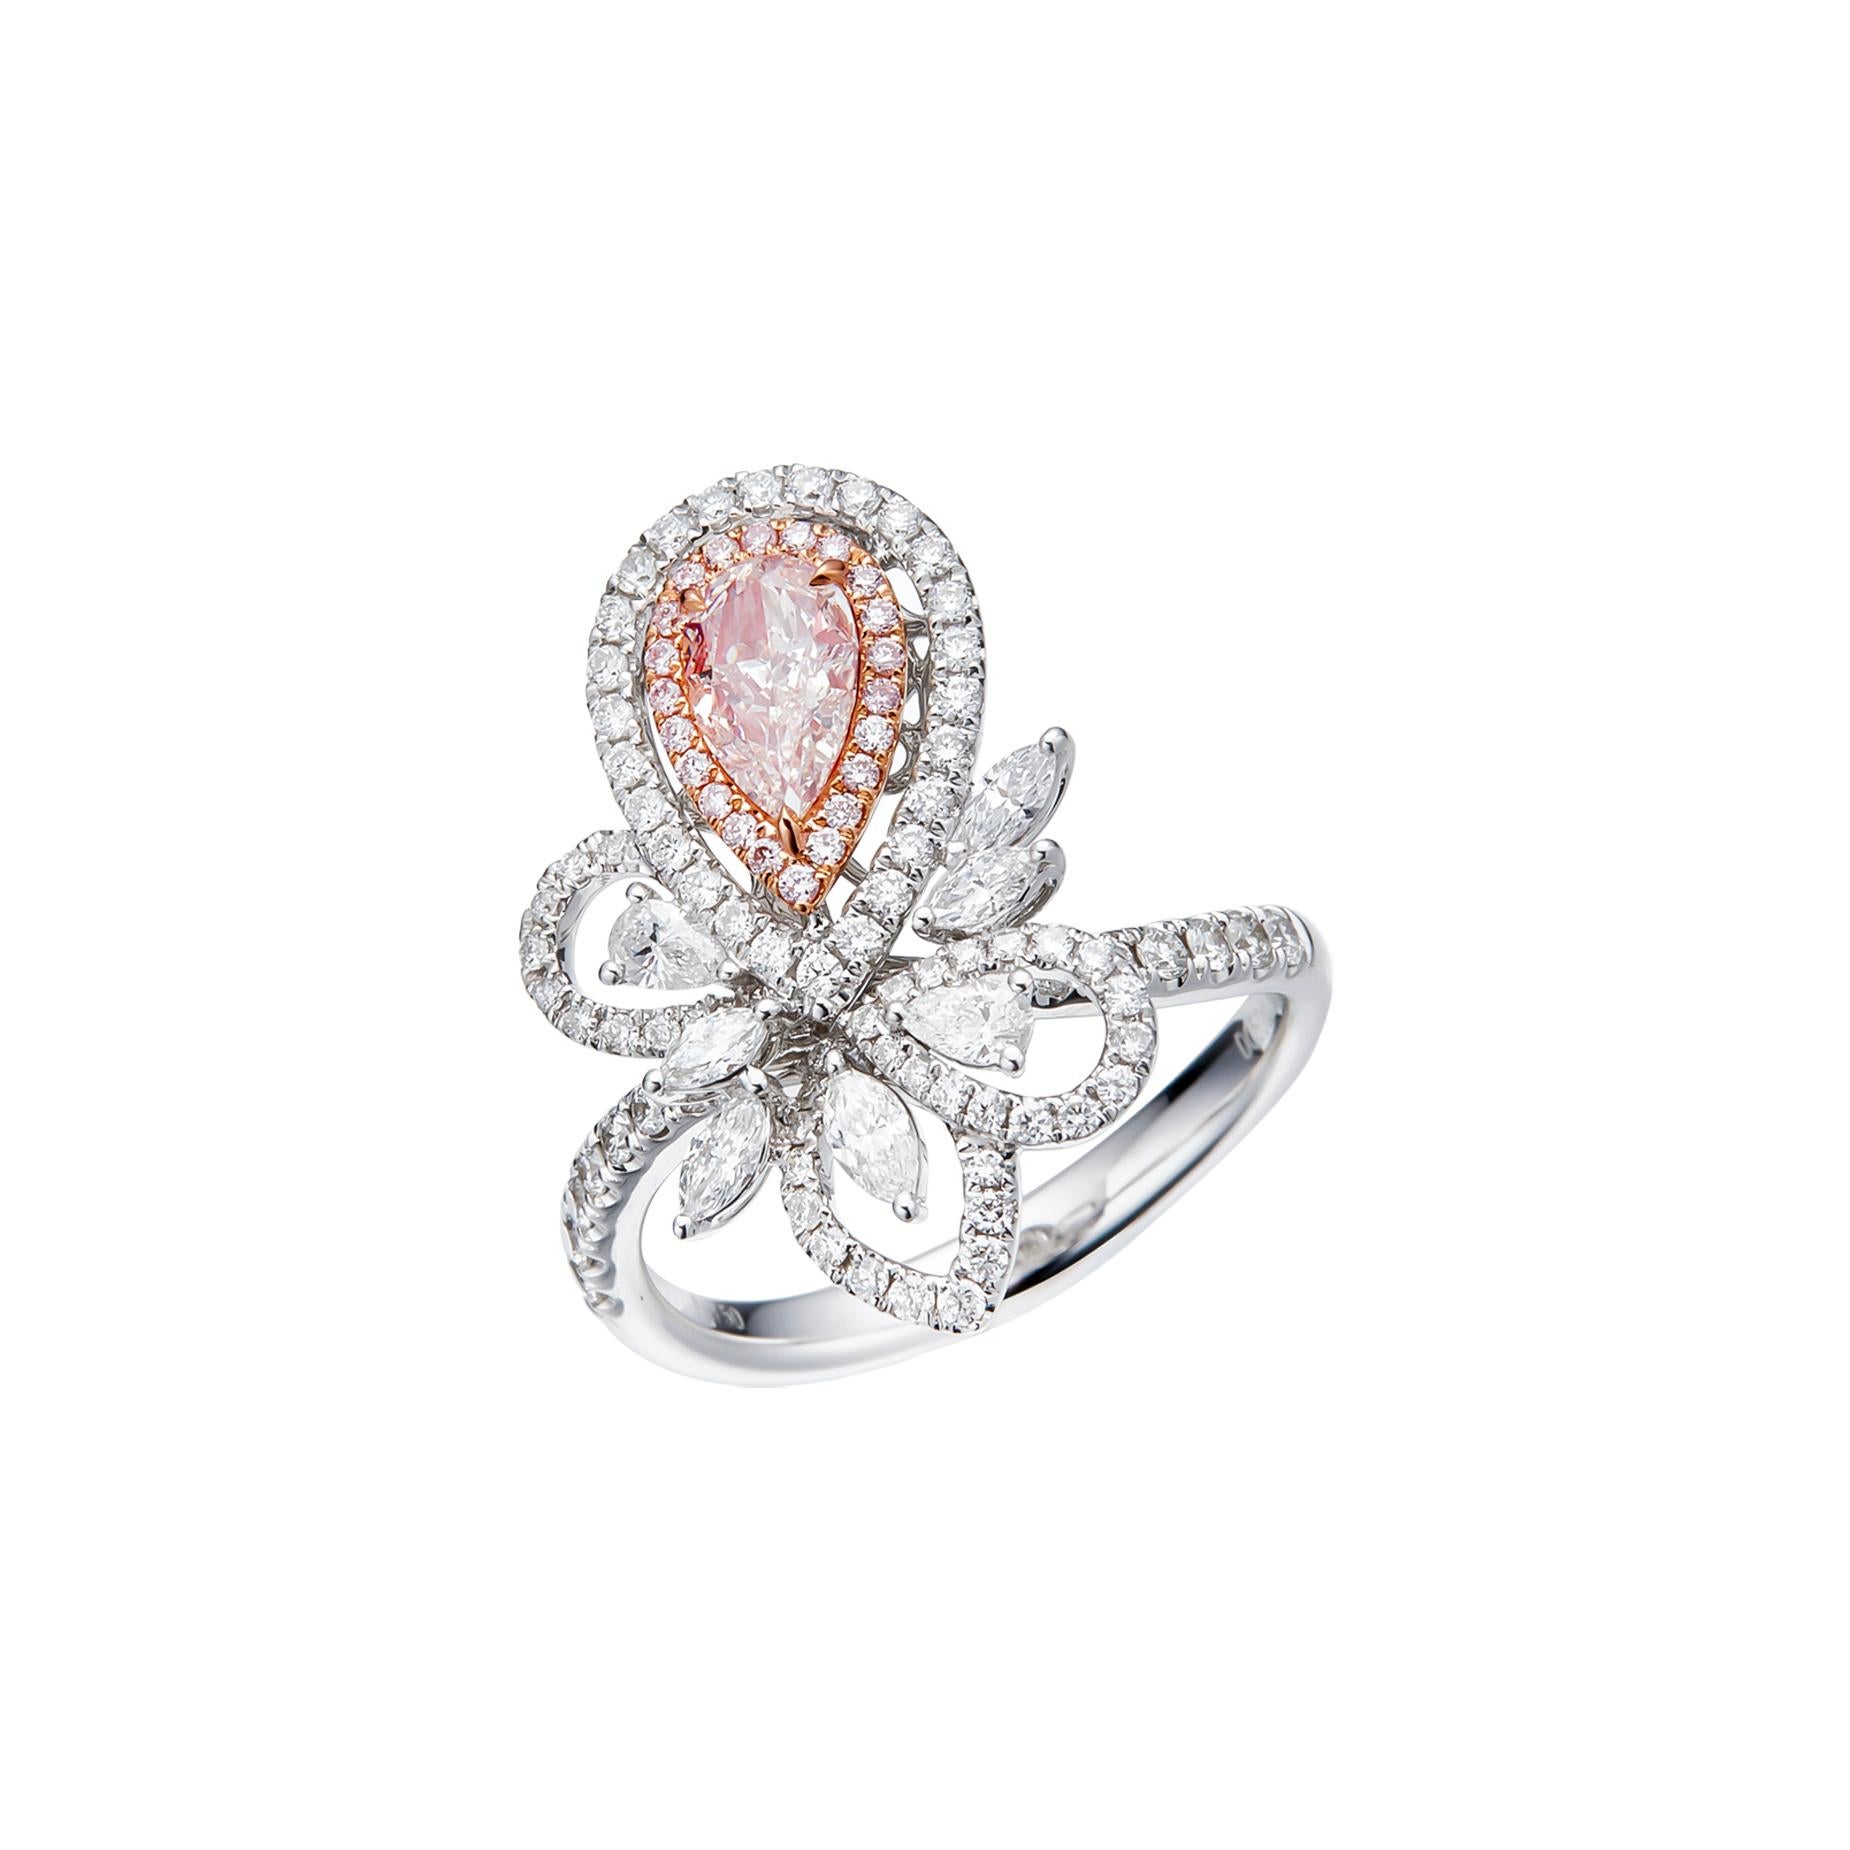 Prepare to be entranced by a symphony of colors and shapes – the GIA Certified 0.50 carat Natural Faint Pinkish Brown Pear Shape Diamond Solitaire Ring. This exquisite piece, set upon a resplendent 18kt gold band, is a true masterpiece that captures